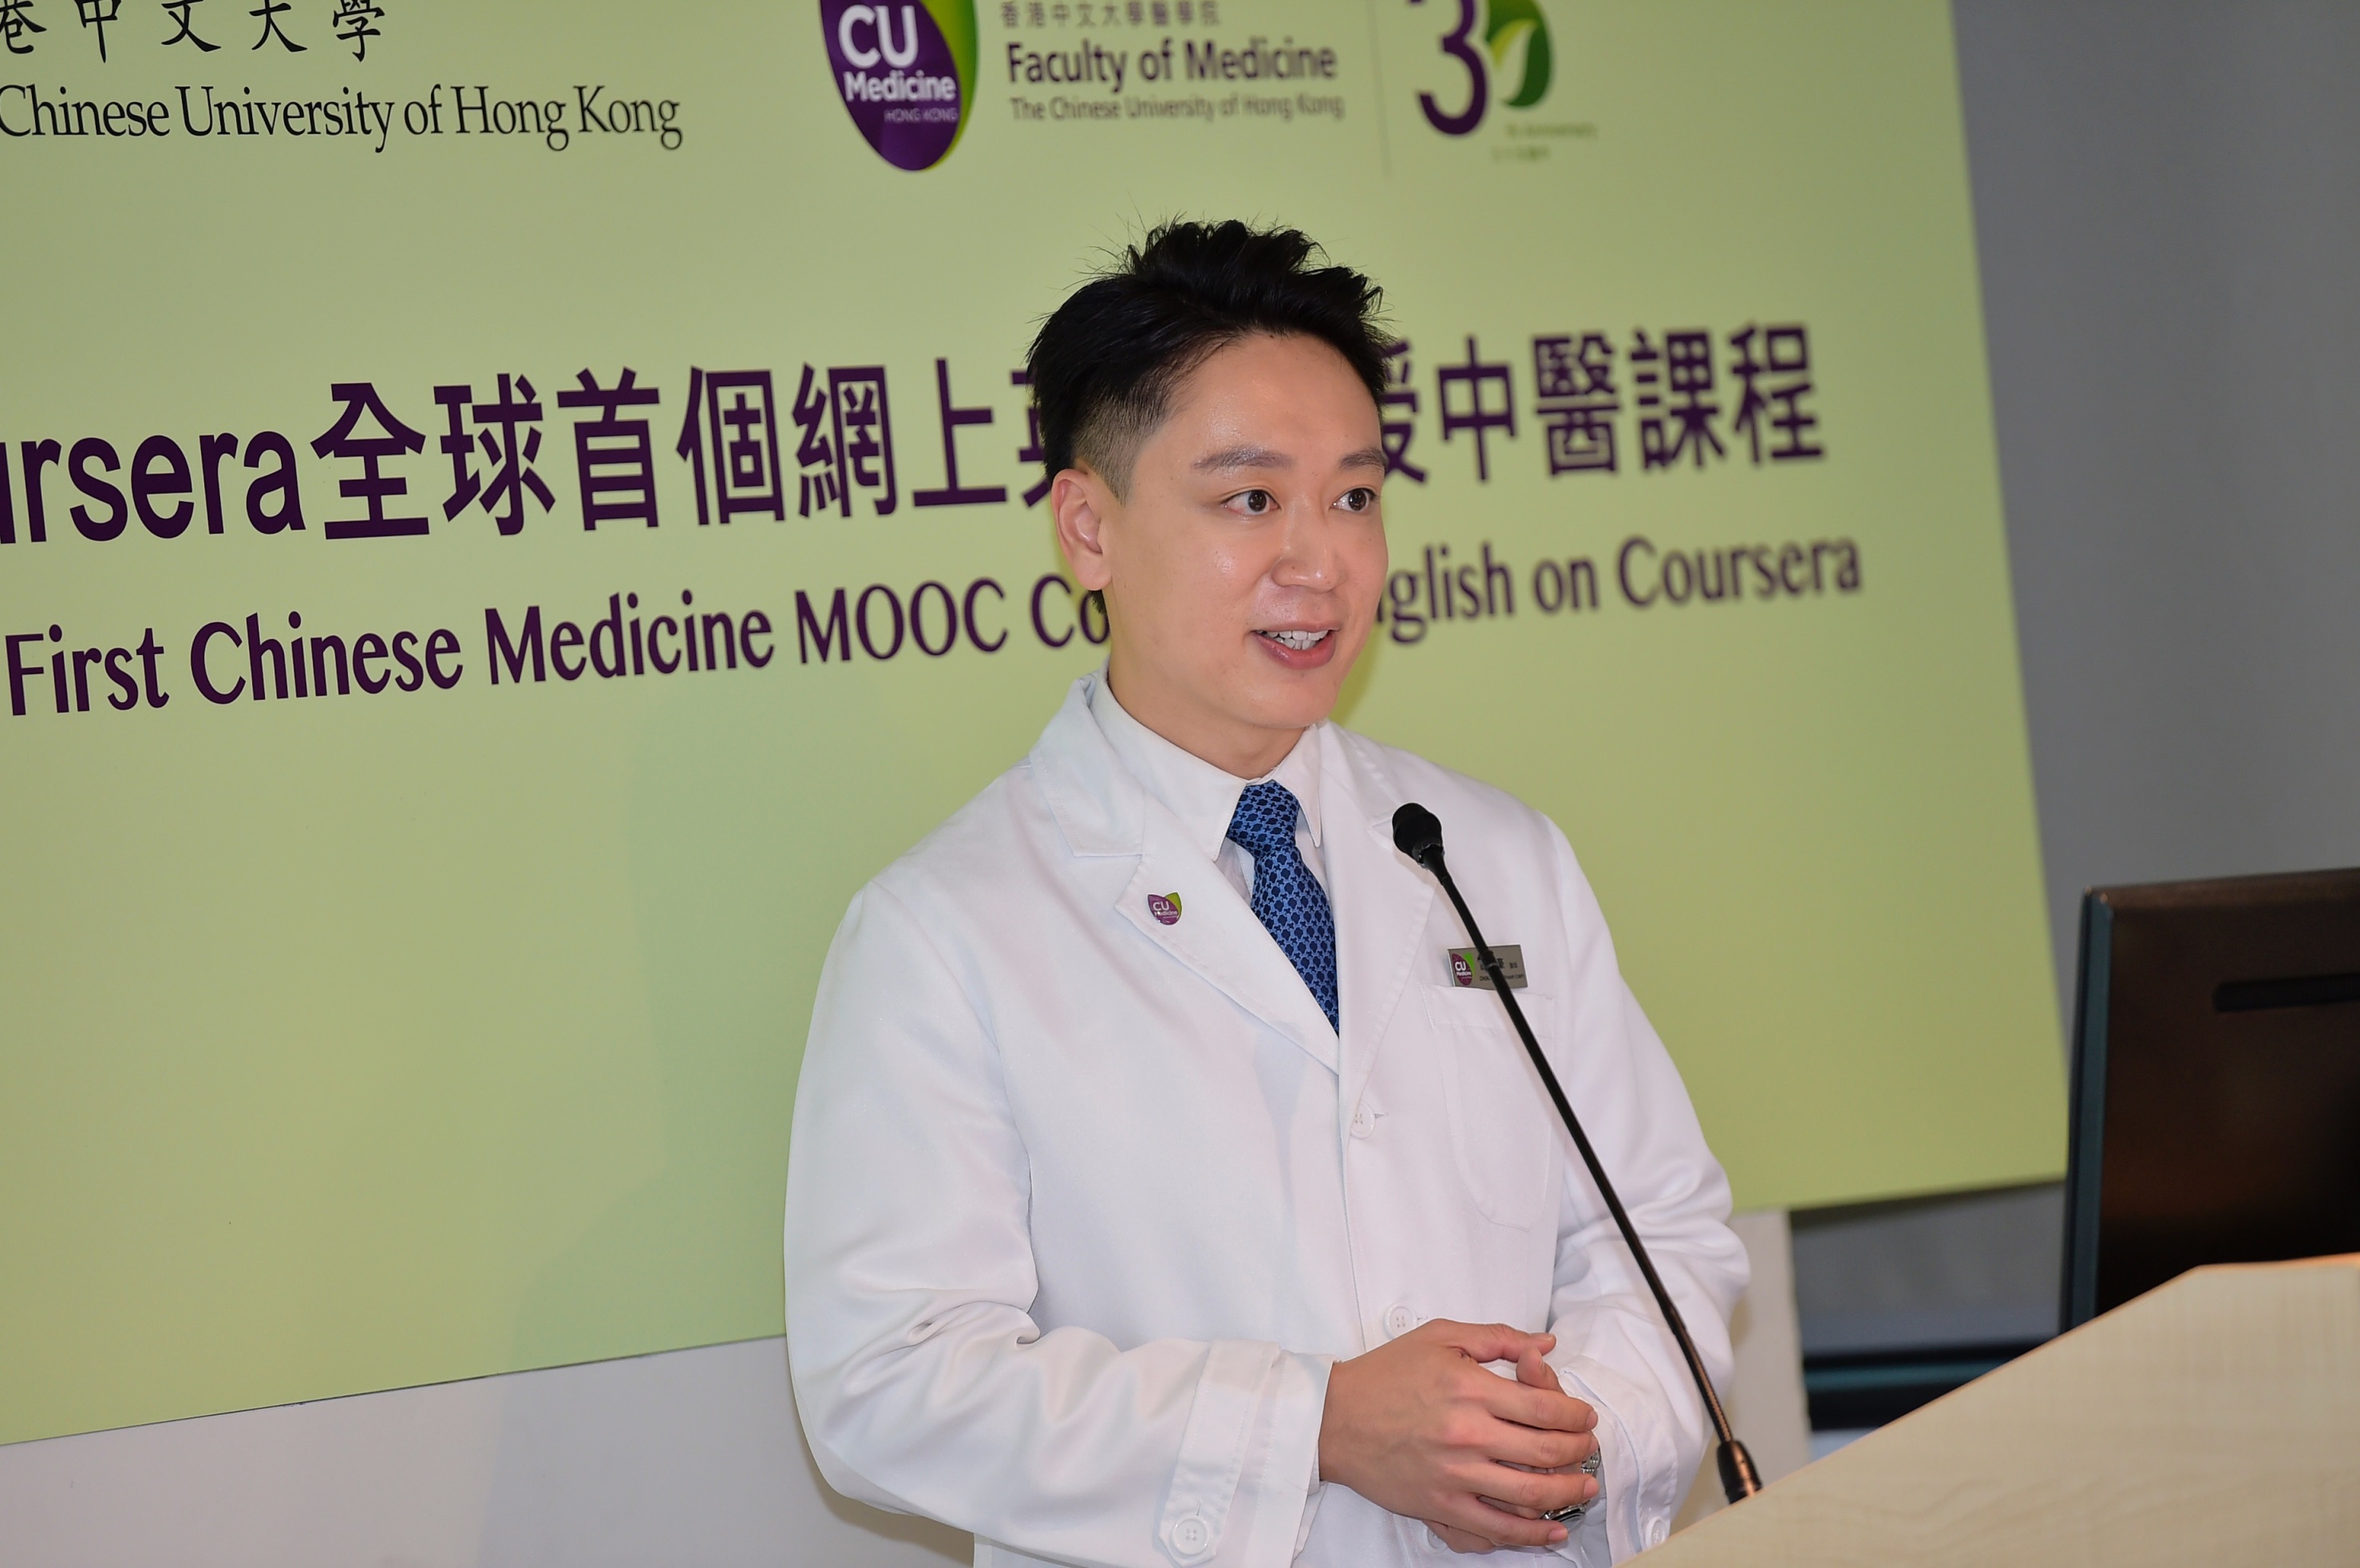 Dr. Vincent CHUNG says the ‘Integrative Medicine Clinical Evidence Portal’ developed by CUHK team can help healthcare professionals and general public understand the treatment of Western and Chinese medicine and clinical scientific evidence. 